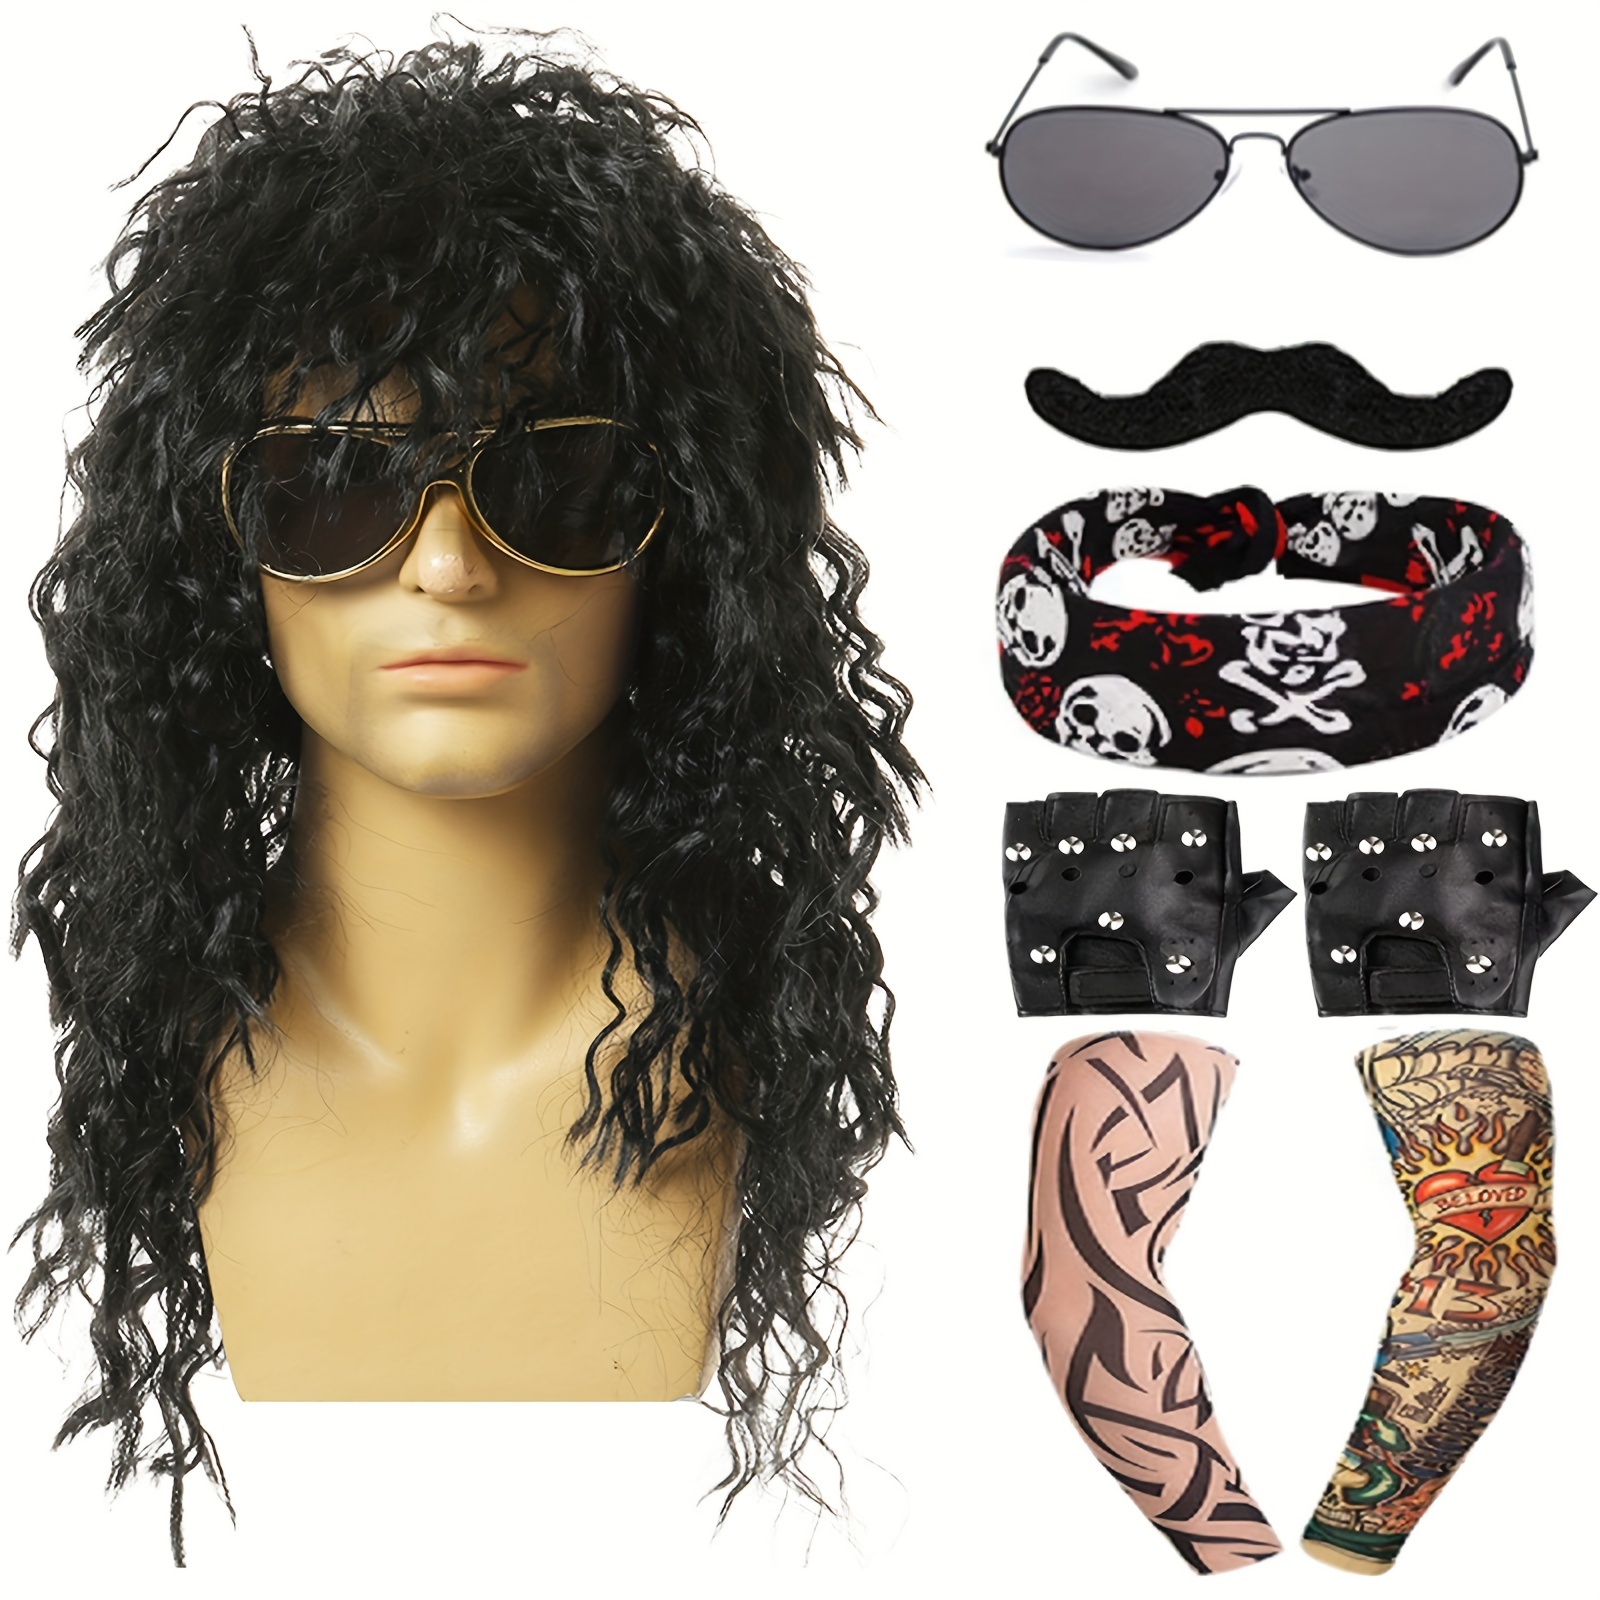 

8-piece 70s & 80s Rocker Costume Set - Hippie Wig, Fashion Glasses, Punk Gloves, Tattoo Sleeves For Halloween & Party Dress-up